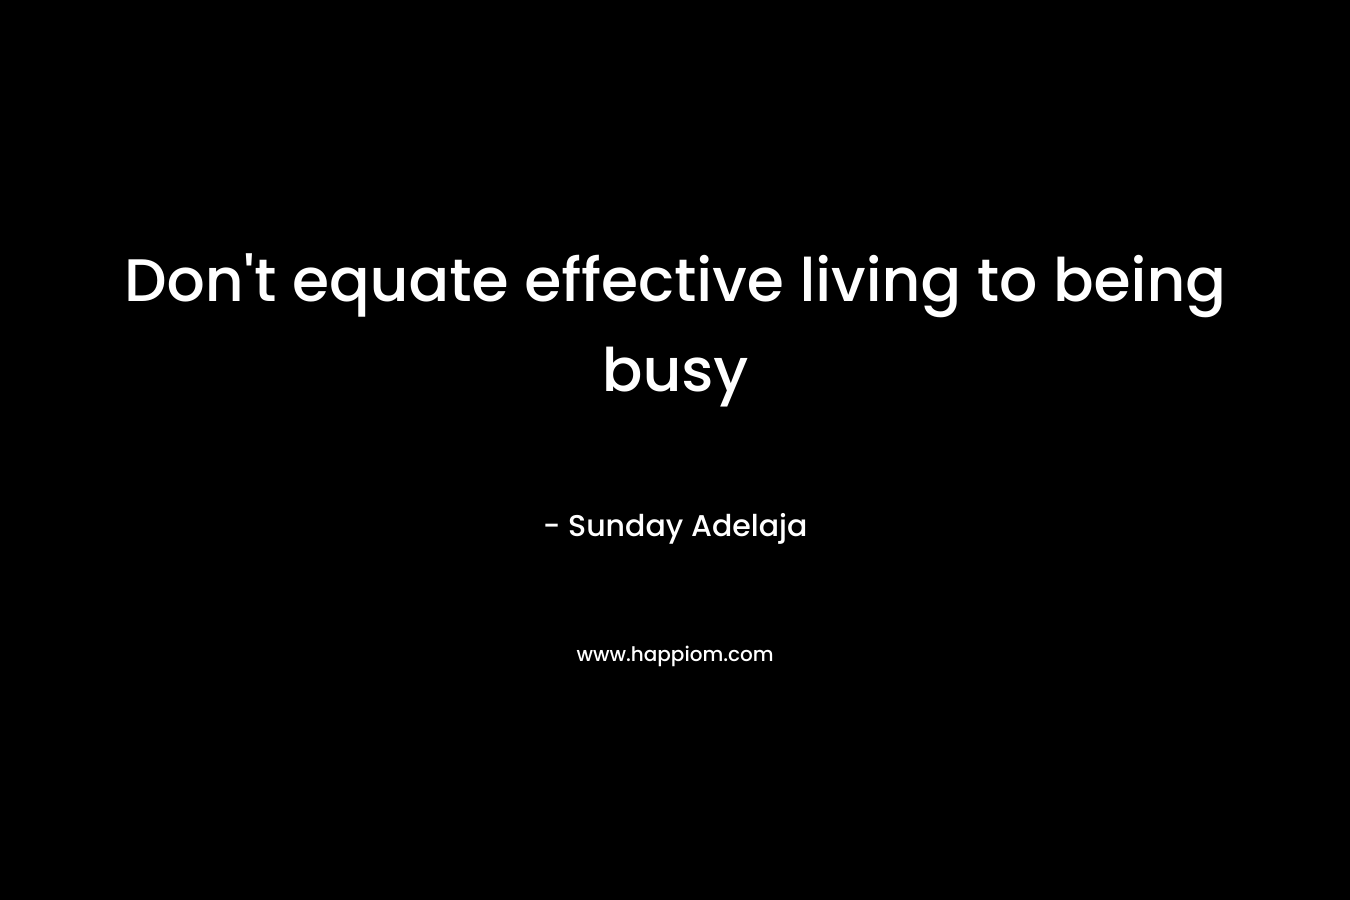 Don't equate effective living to being busy